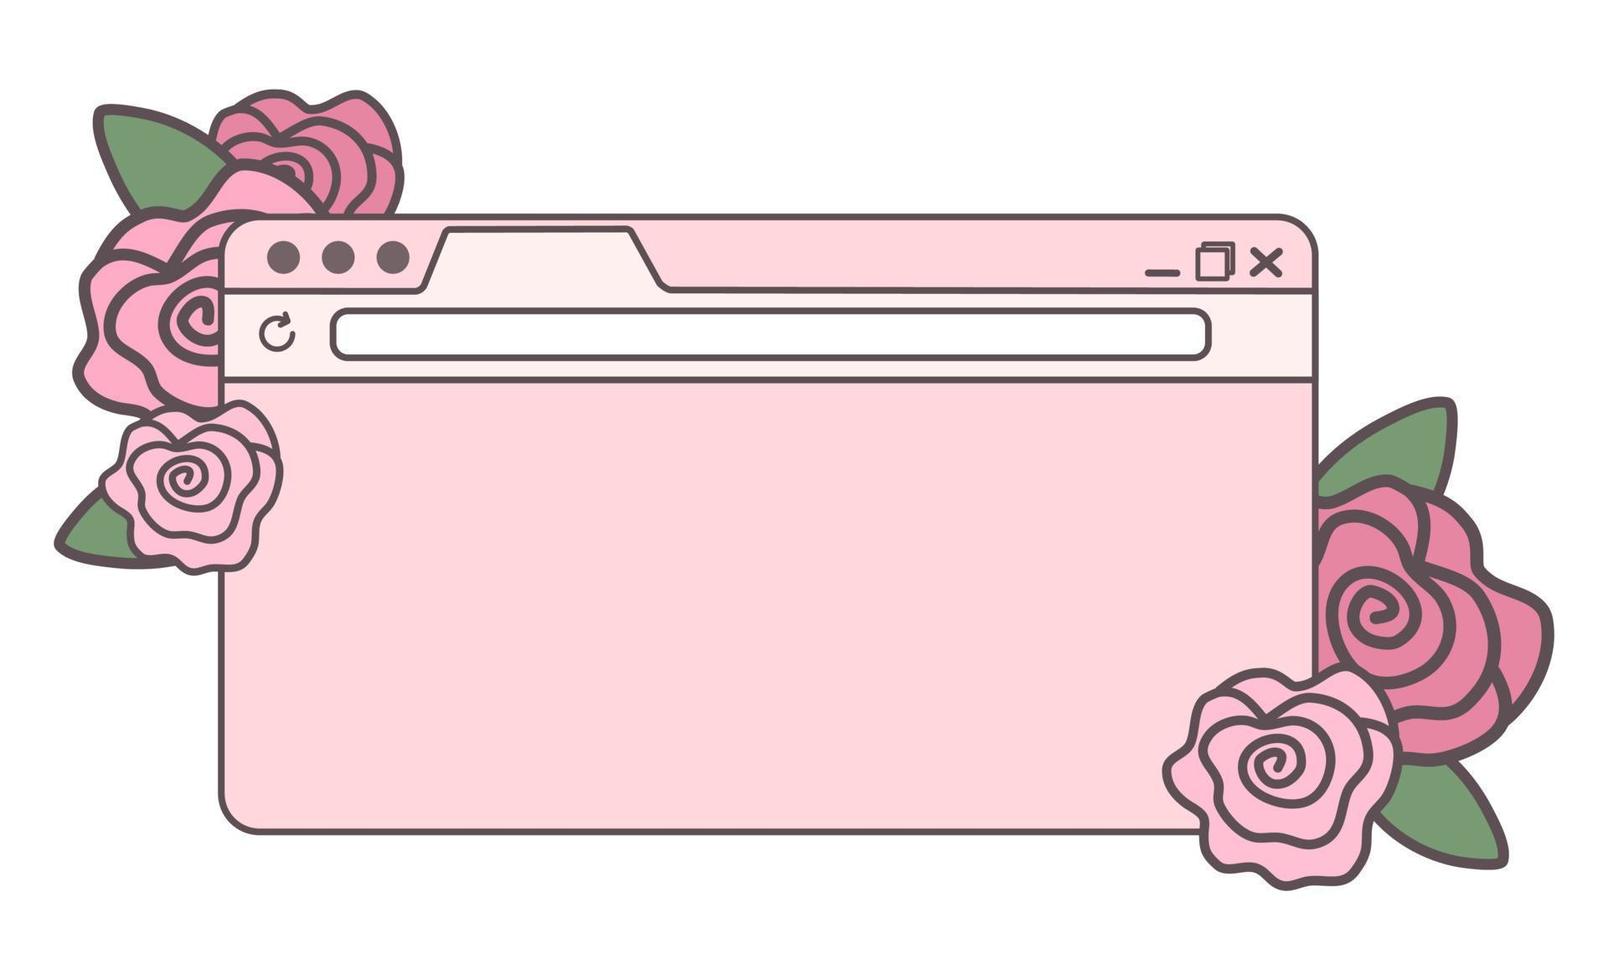 Old computer aestethic. Retro browser computer window with flowers. In trendy y2k retro style. Vector illustration.